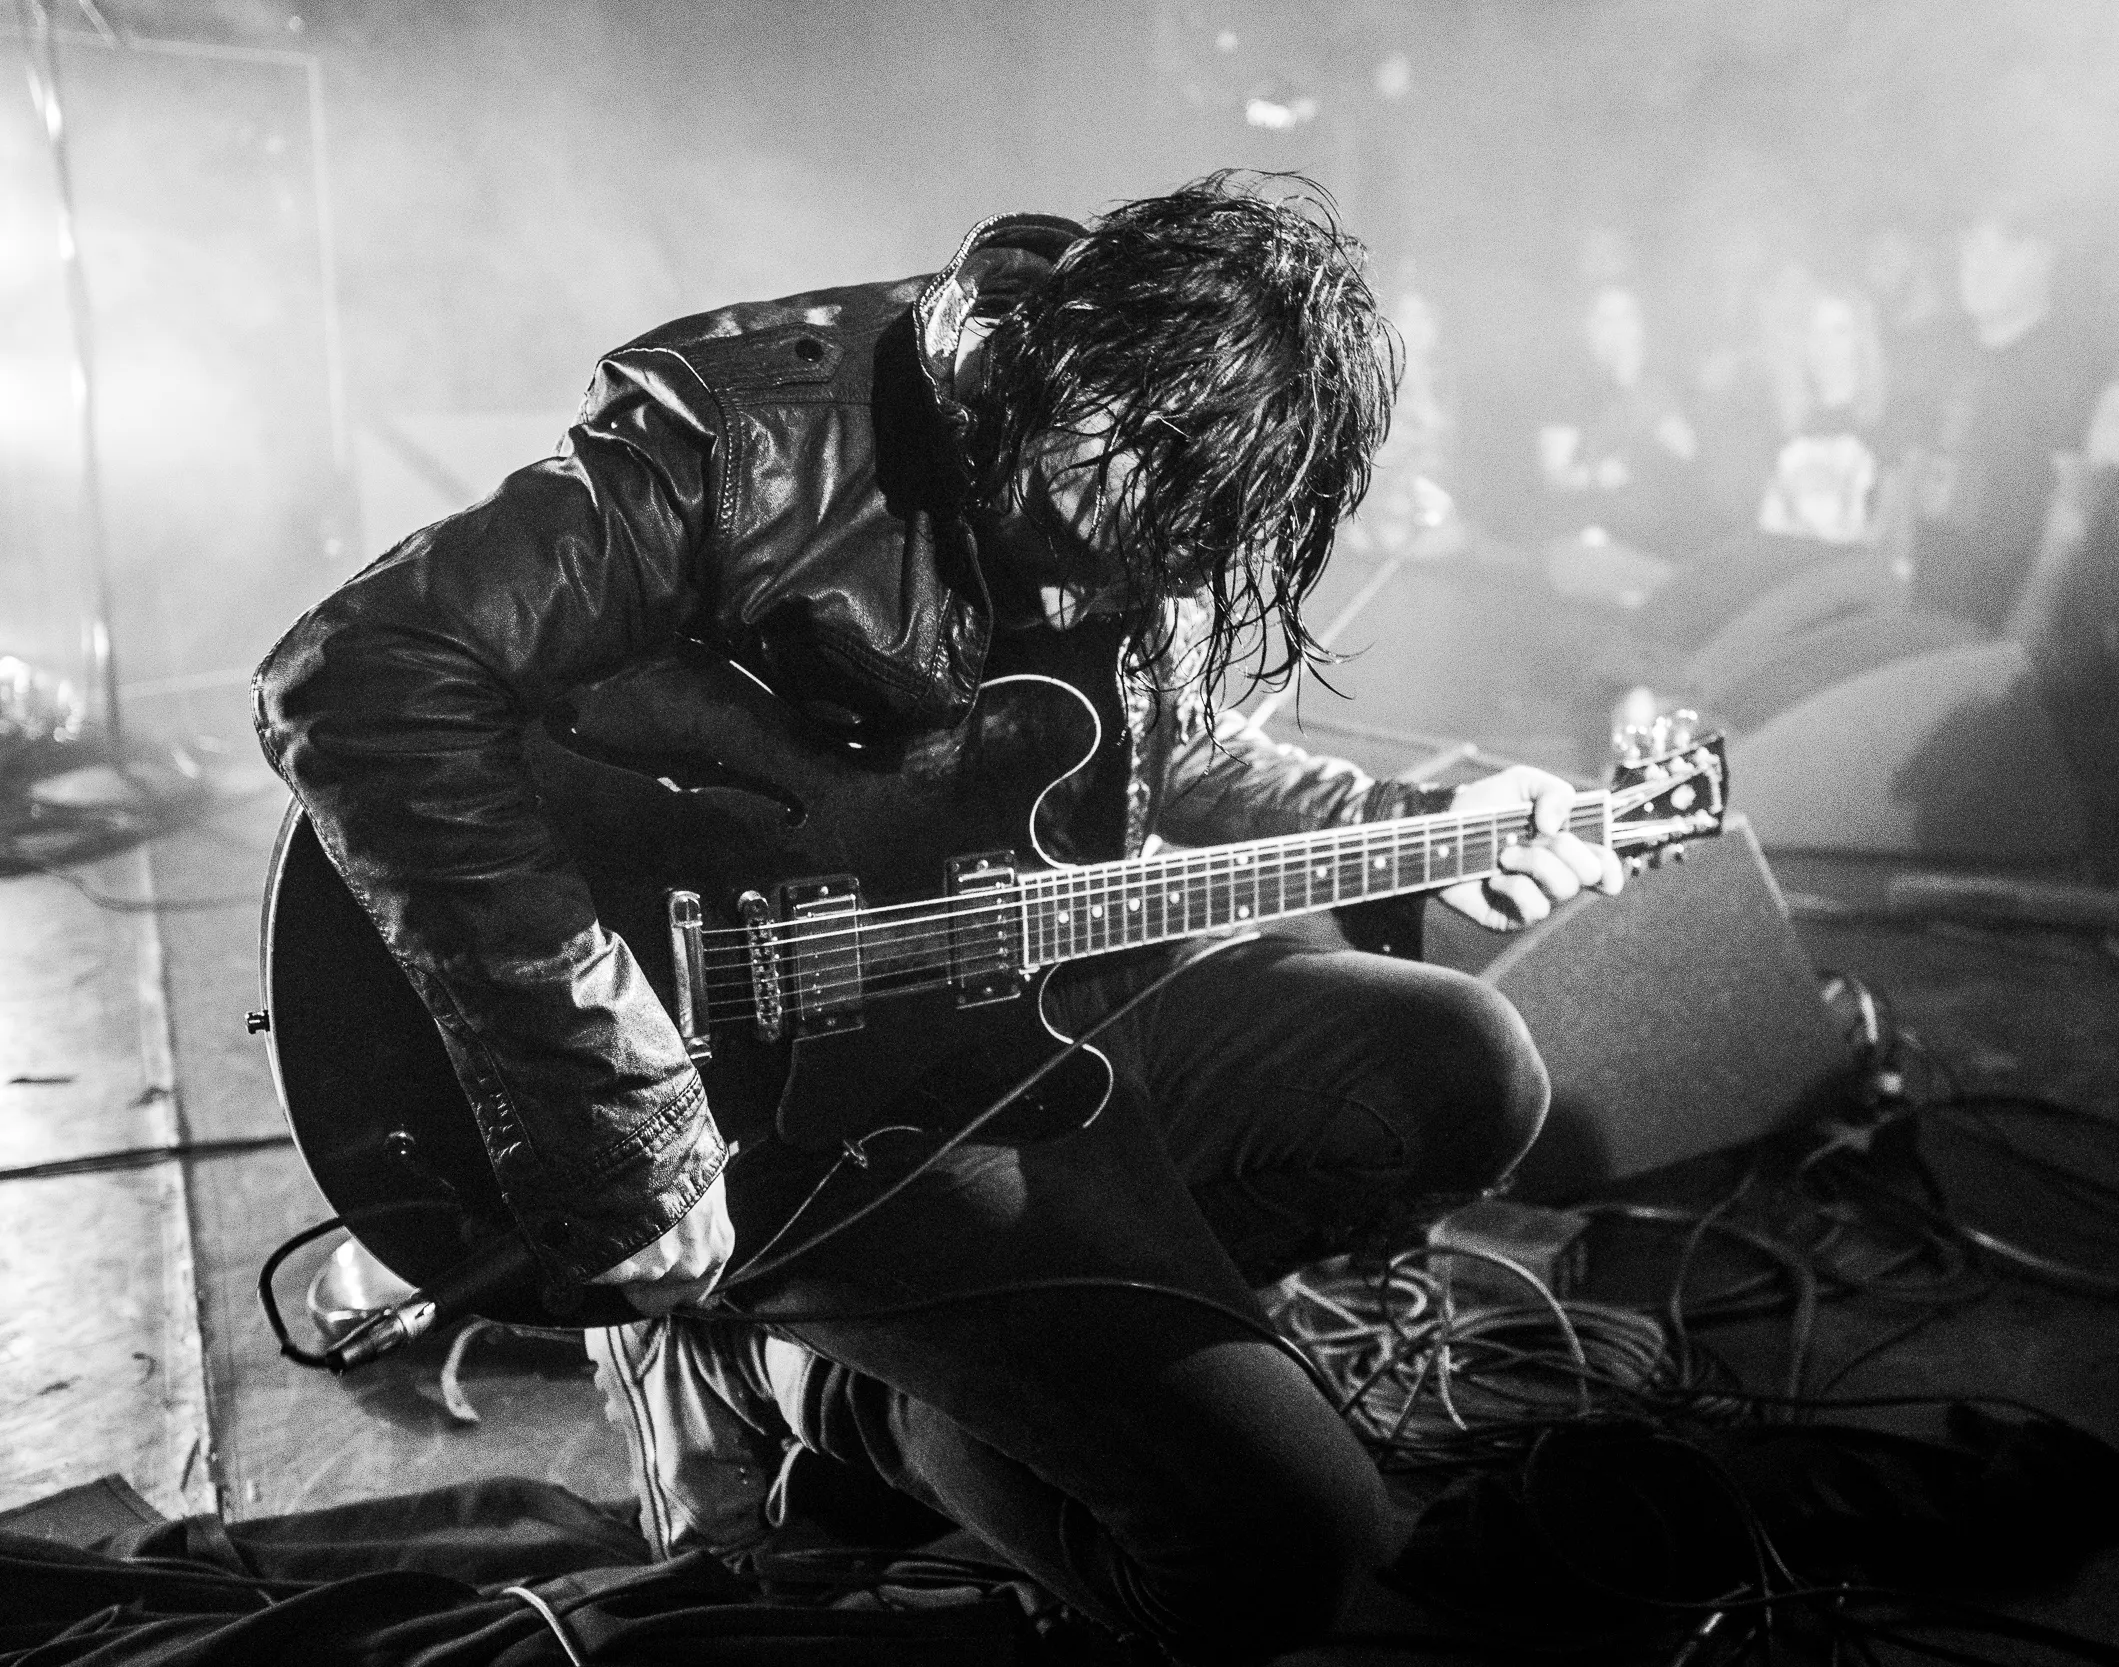 Reignwolf Bridges The Gap Between Solo and Band Identities